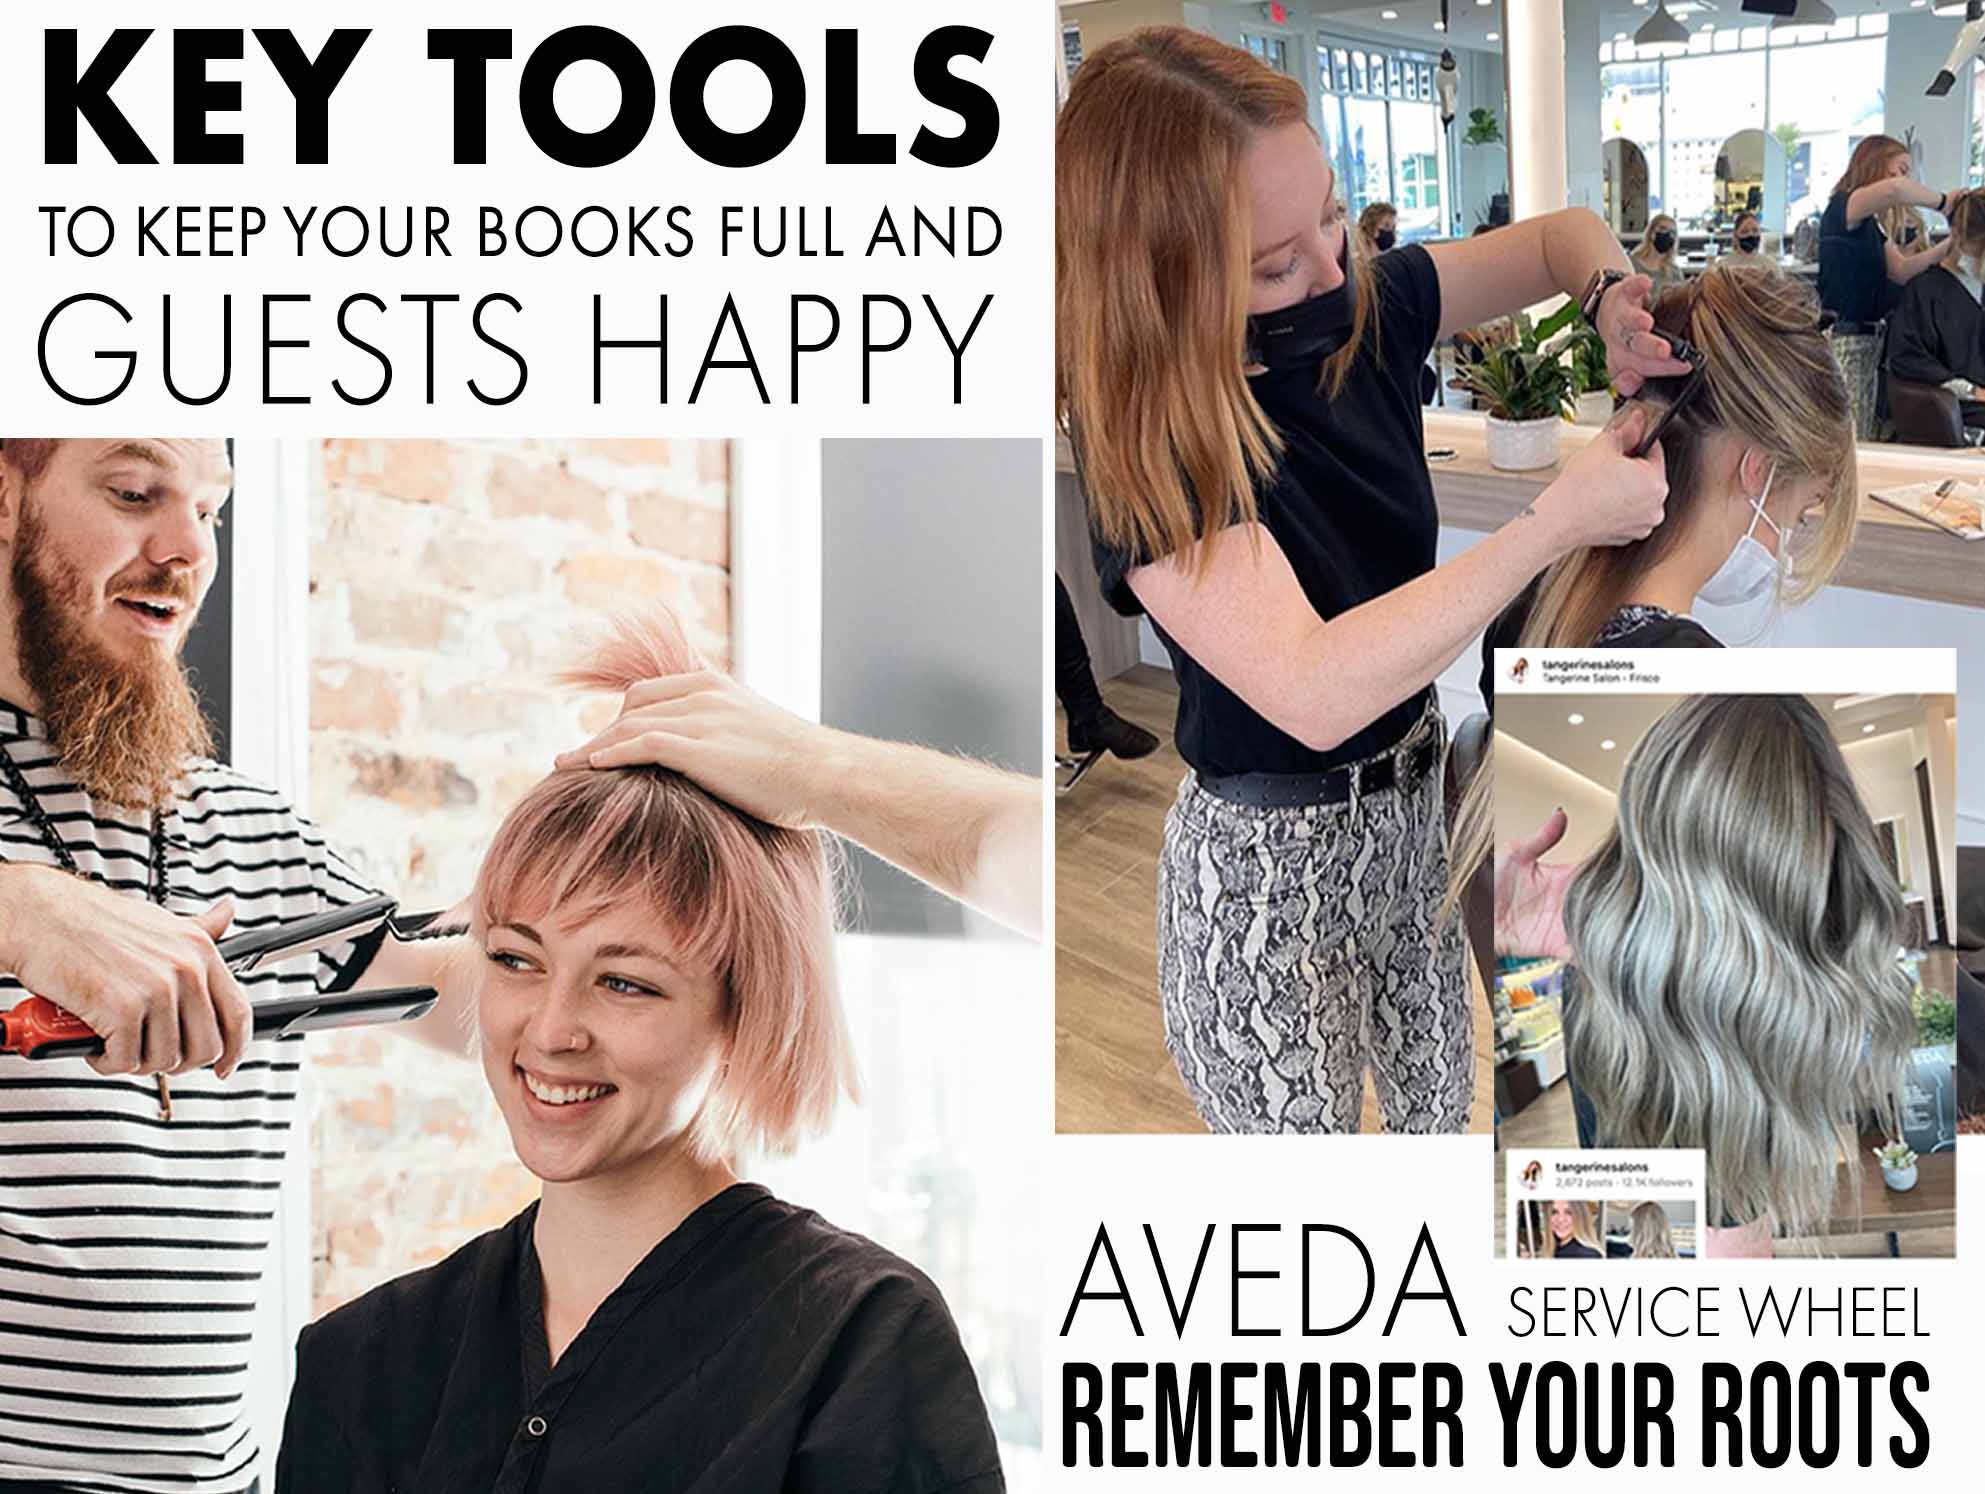 Image of aveda stylists working on hair